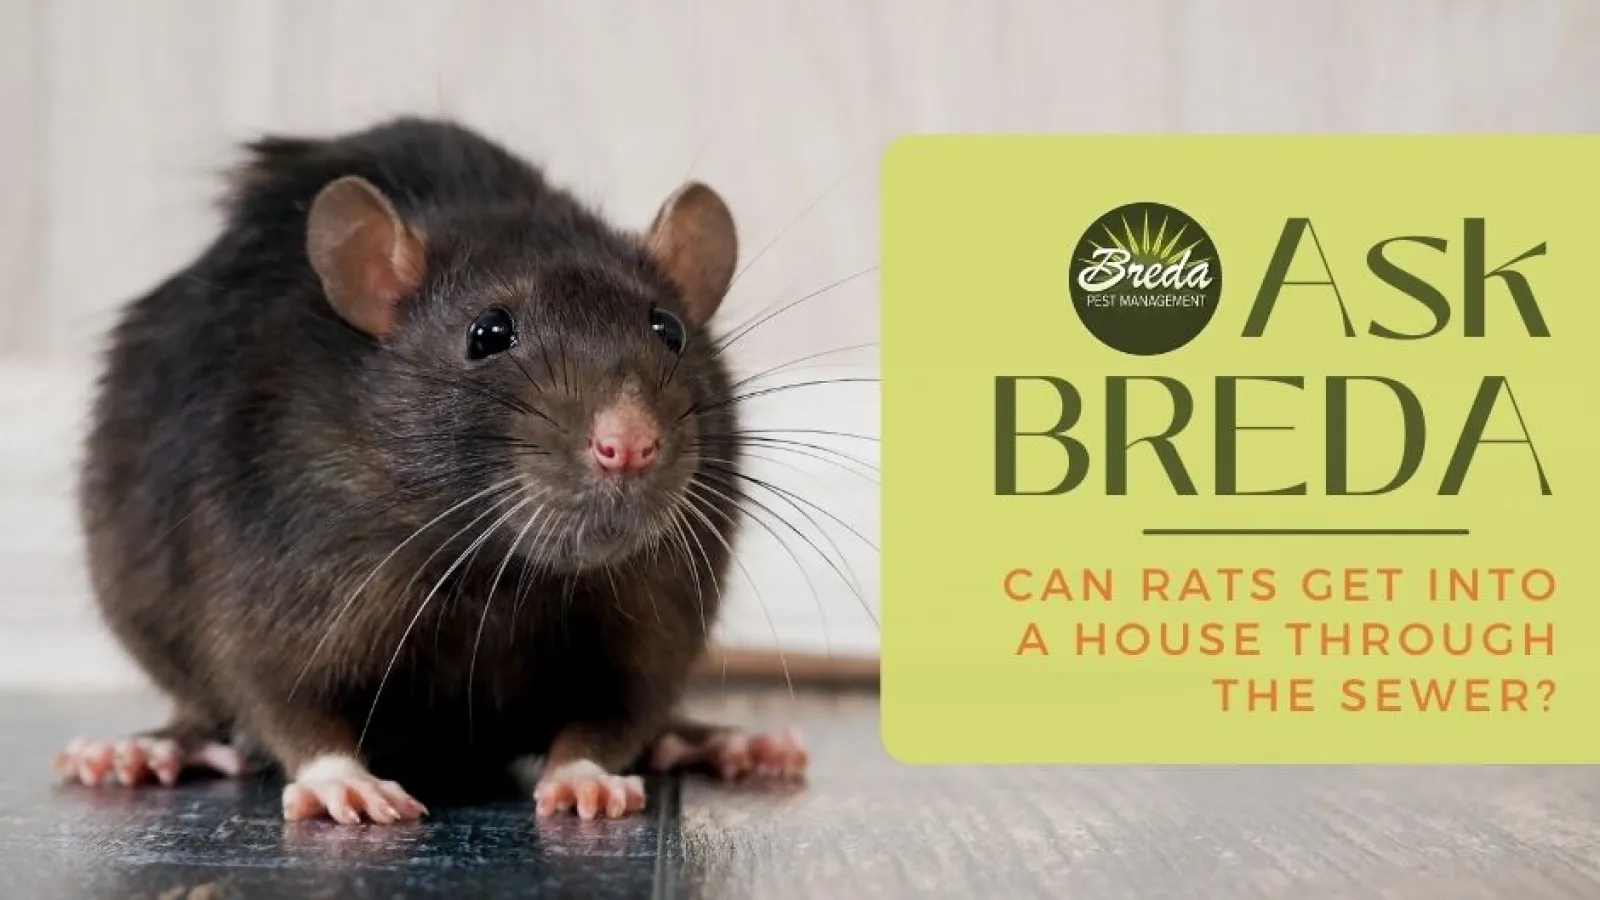 breda offers rodent extermination services